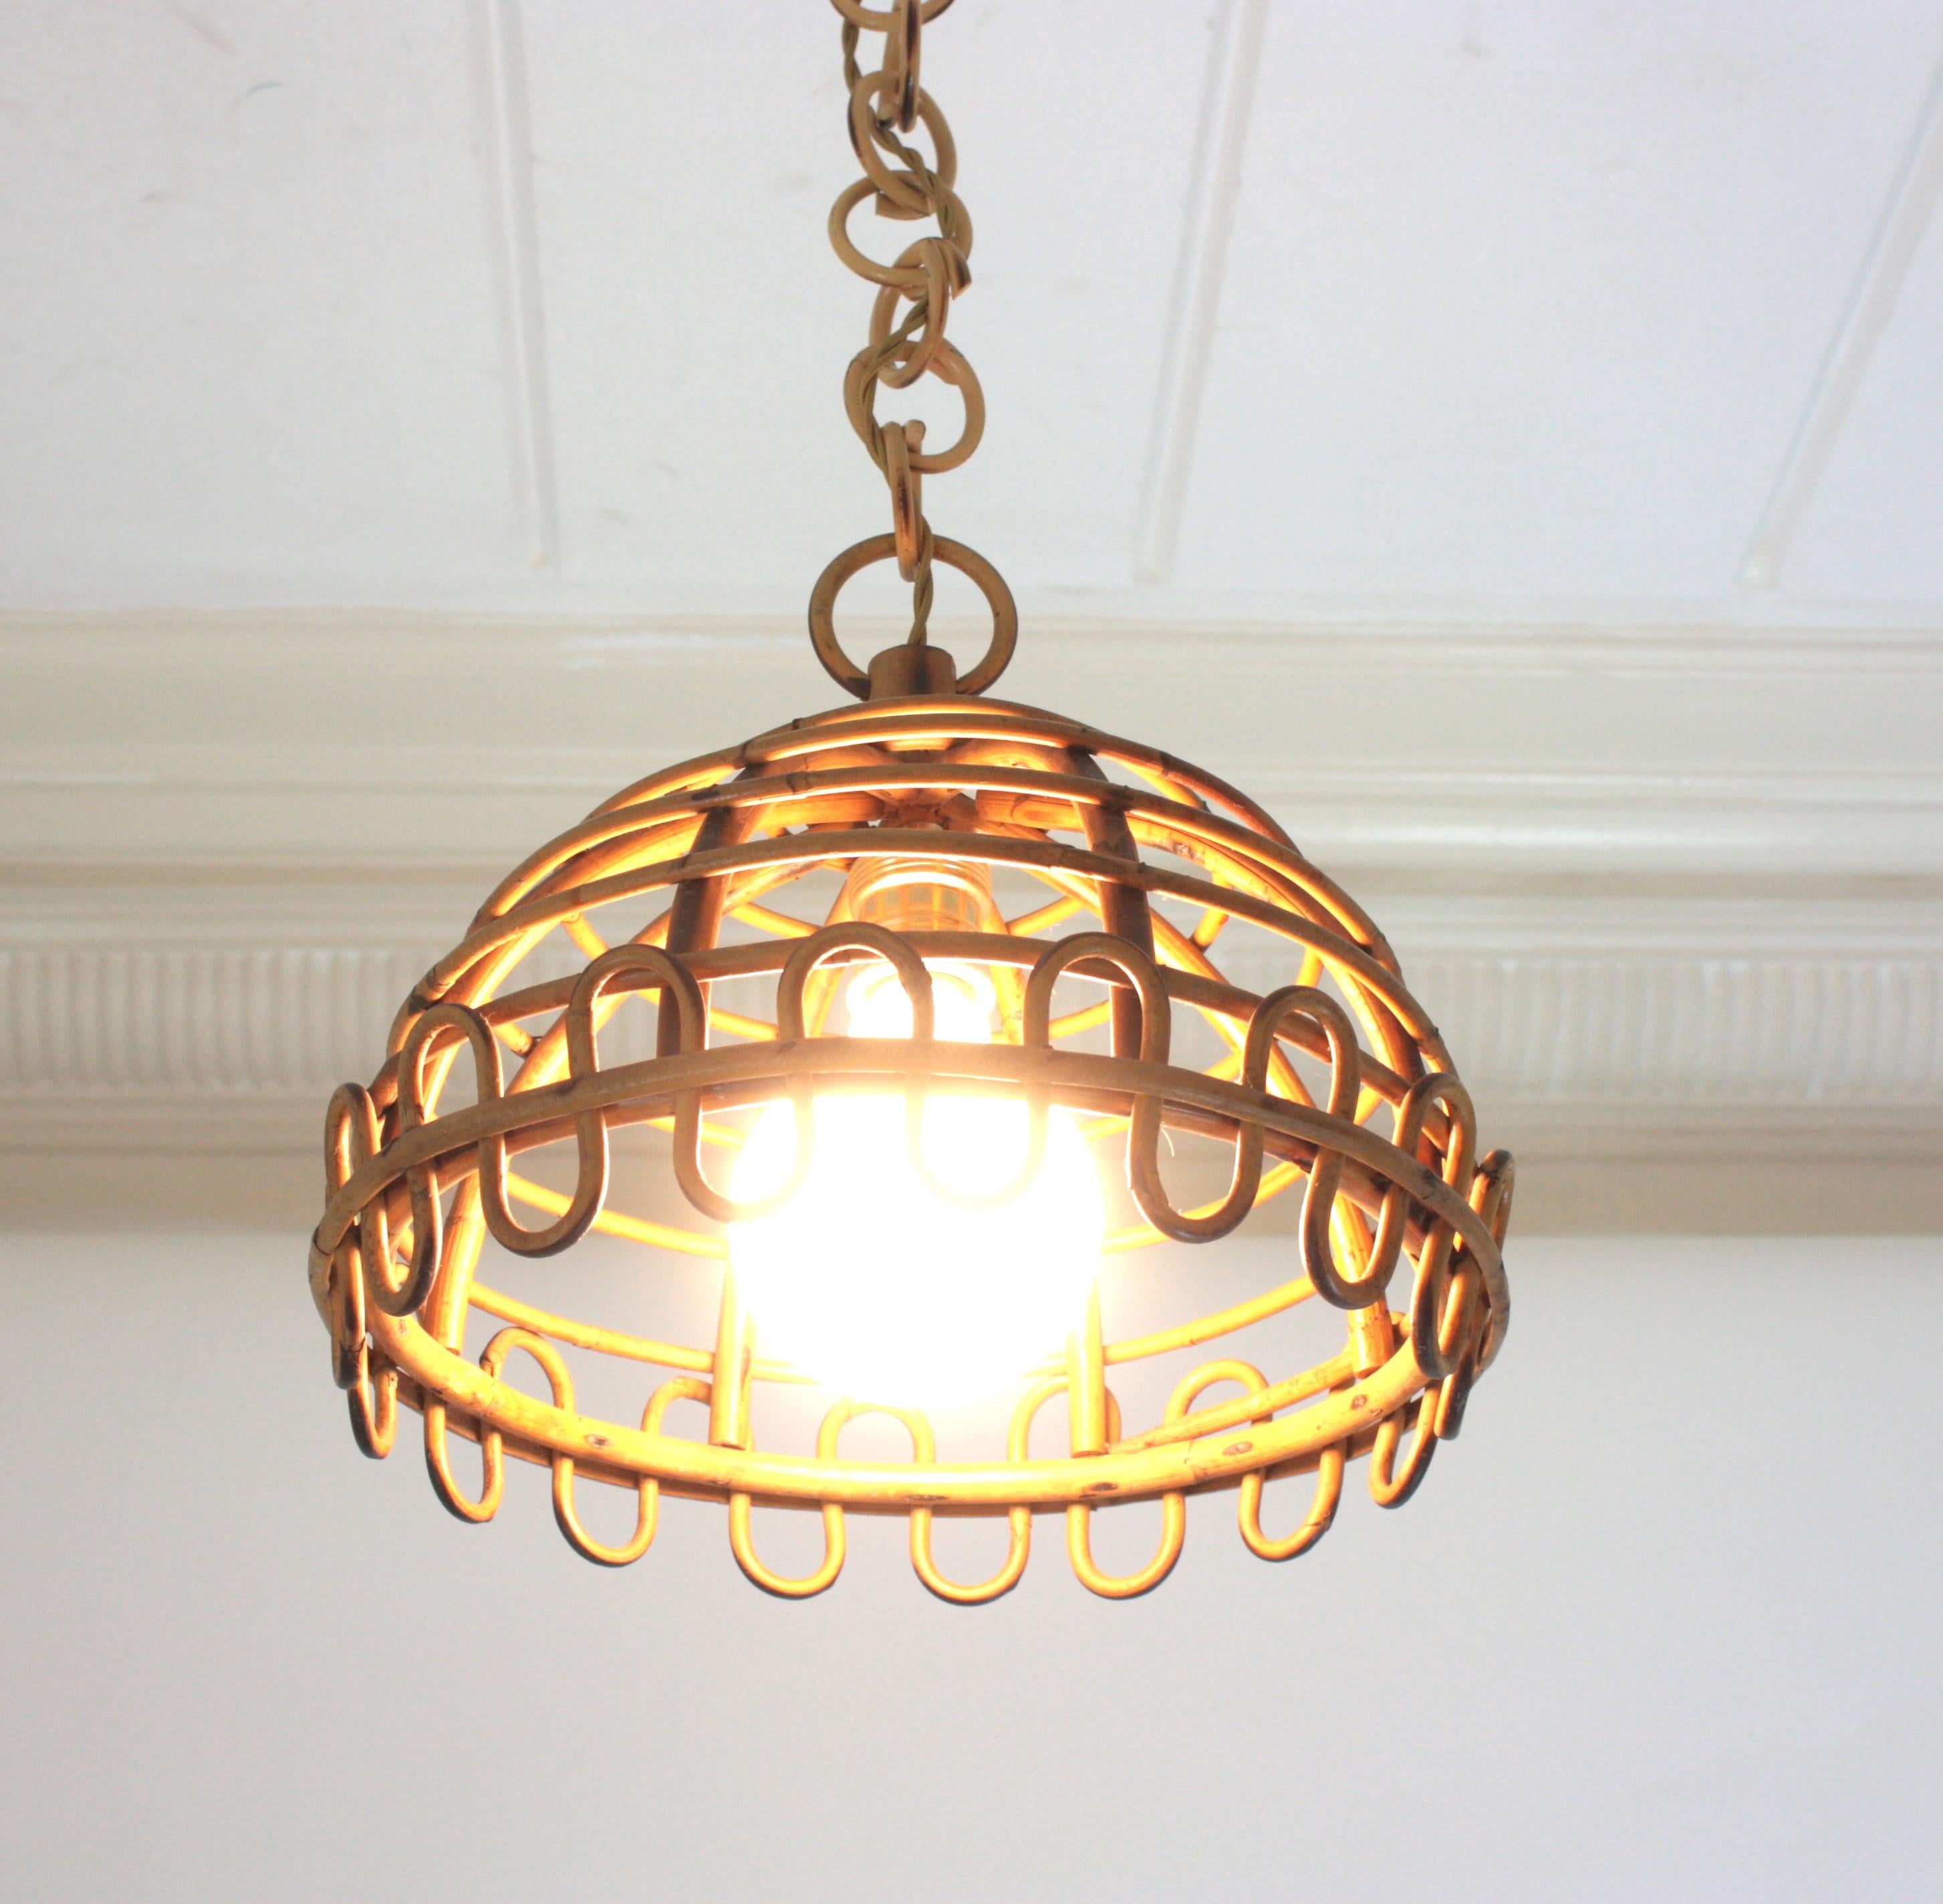 Franco Albini Rattan Dome Pendant Hanging Light, 1960s In Good Condition For Sale In Barcelona, ES